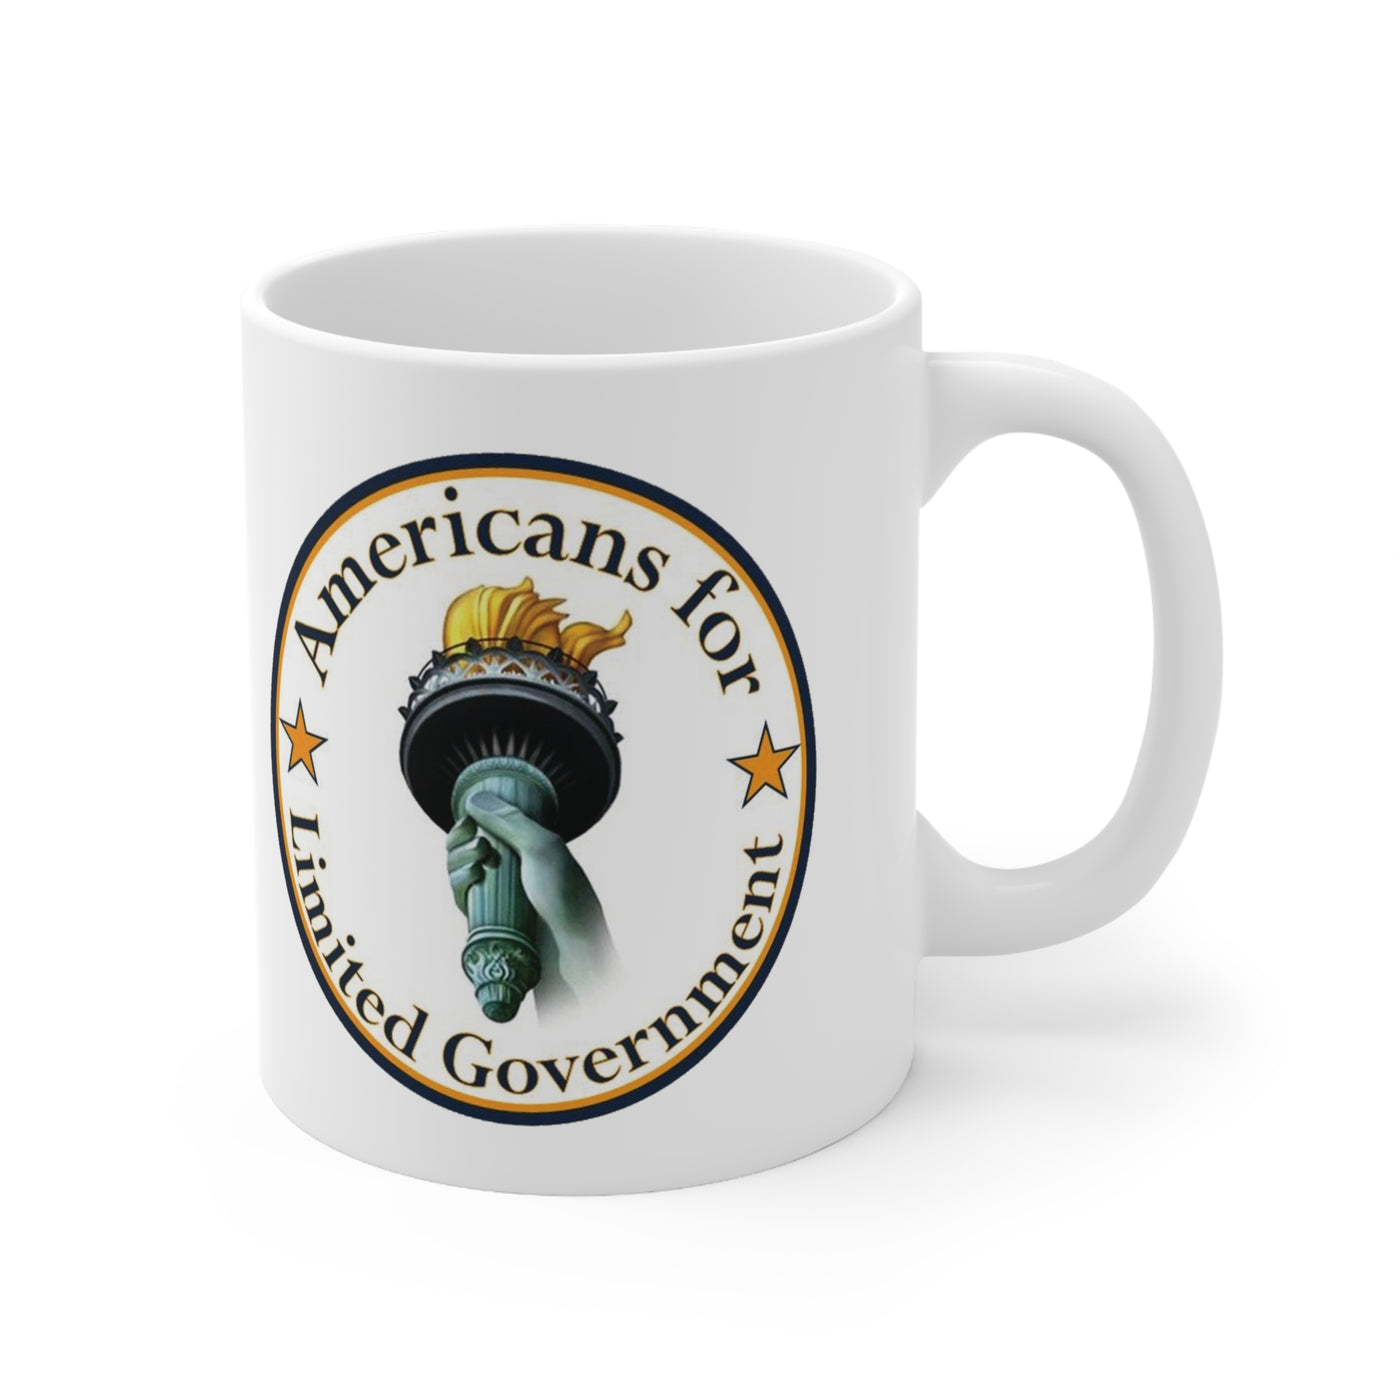 Americans for Limited Government Coffee Mug 11oz